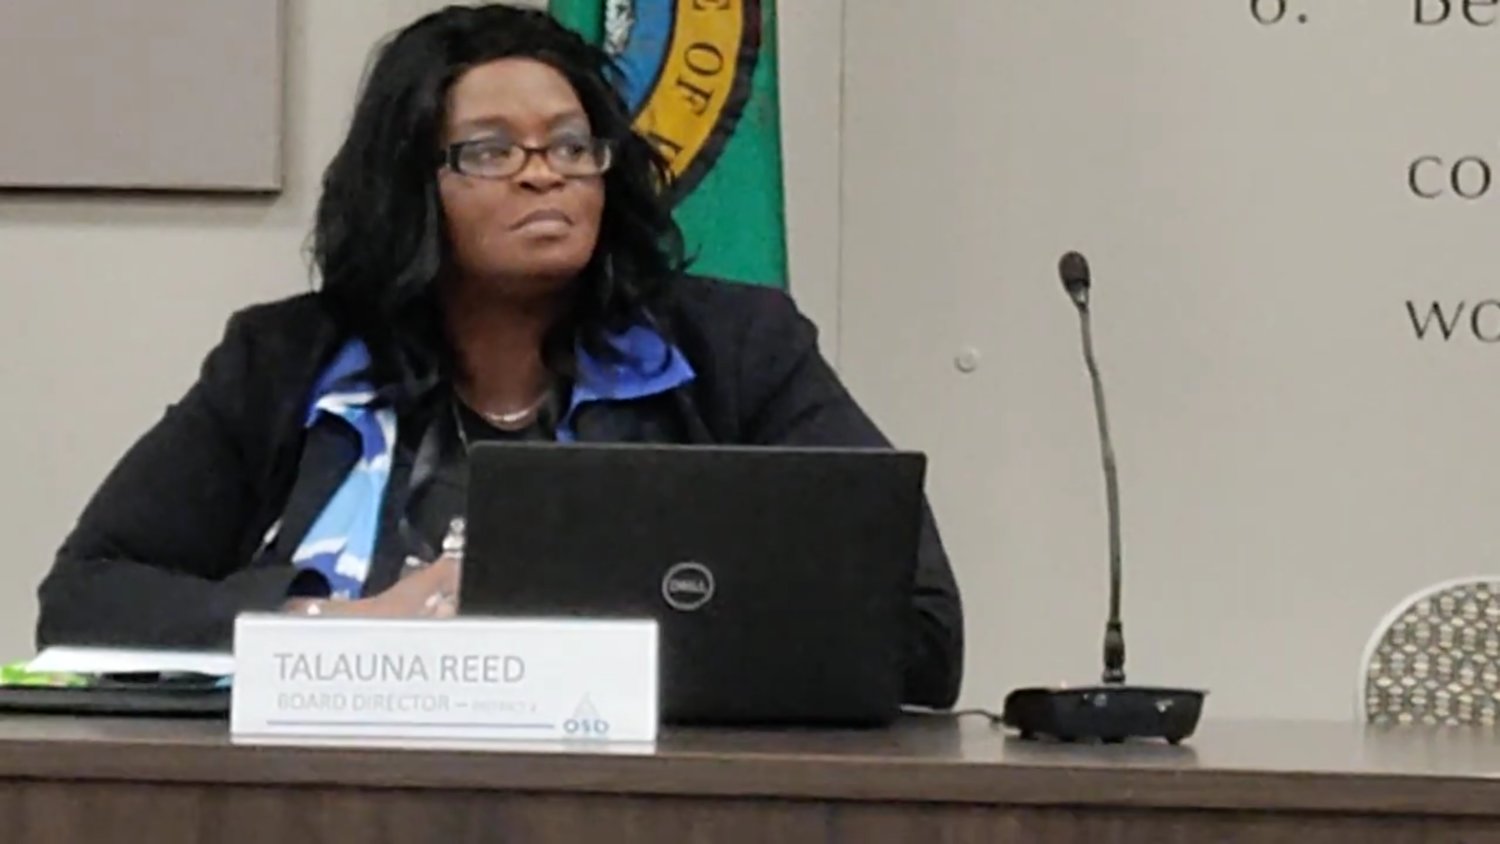 Around 31 people registered and attended in-person to comment mostly on Talauna Reed’s appointment during the Olympia School District’s meeting on November 11, 2022.